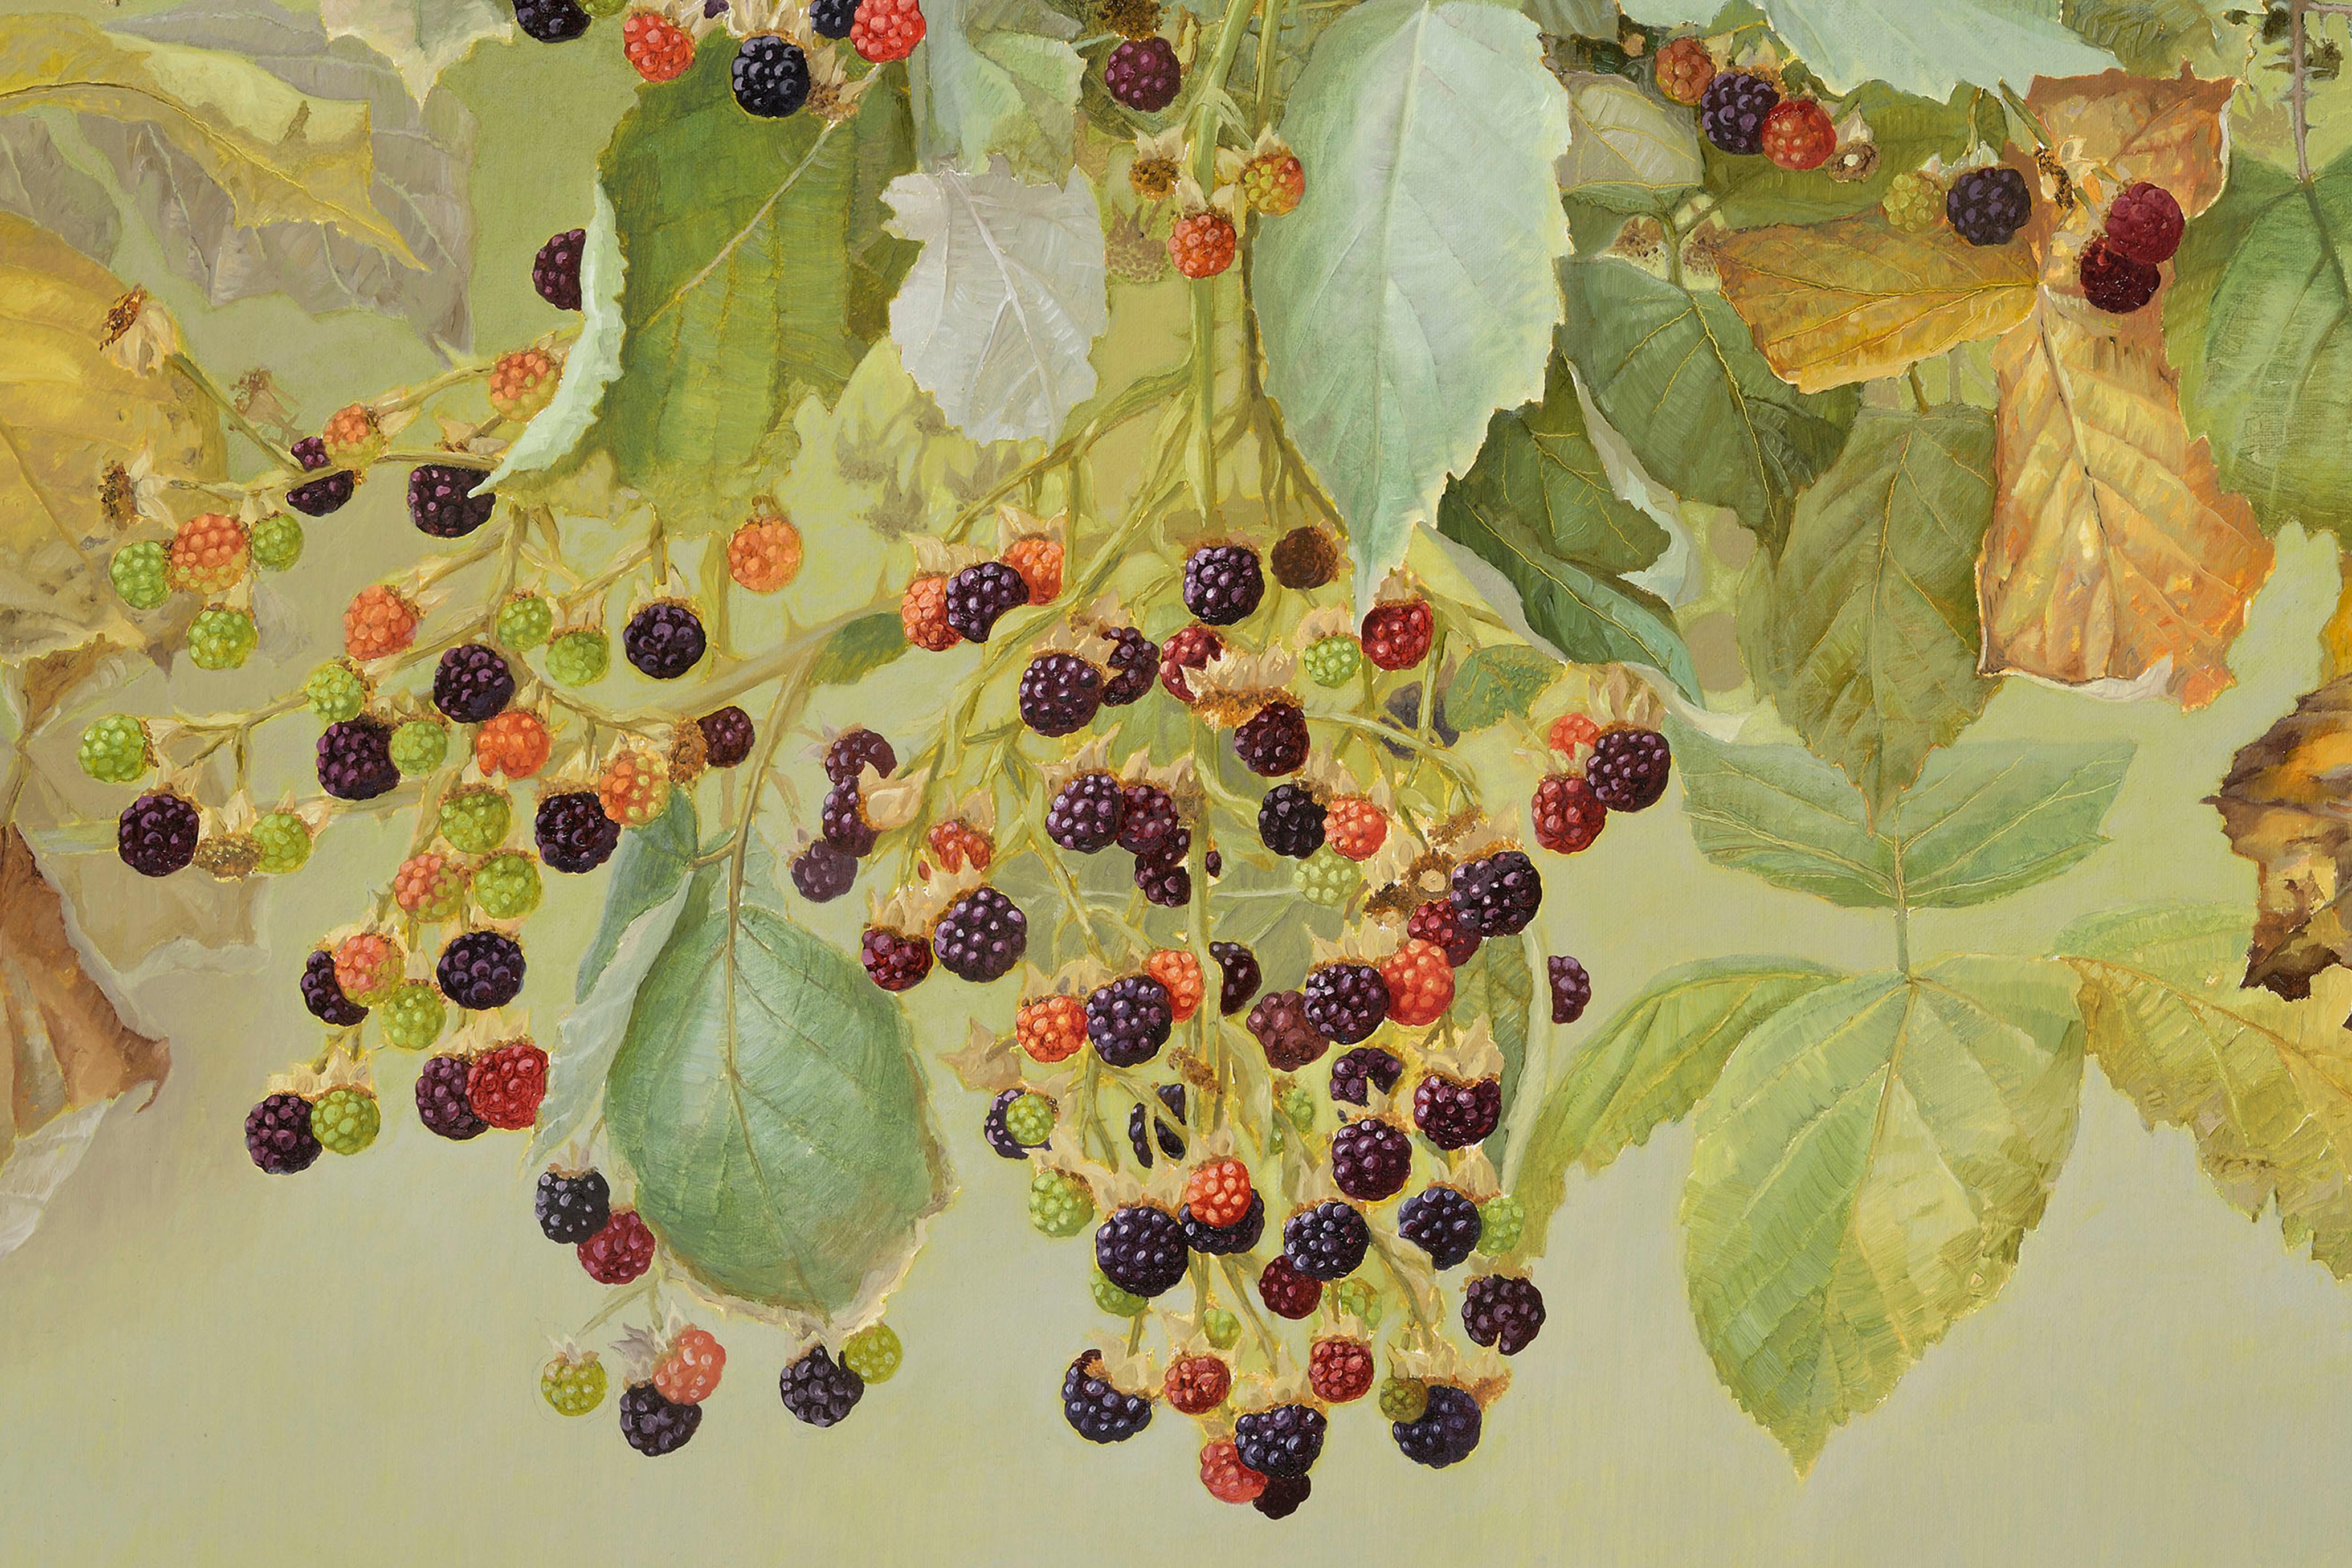 Blackberries, Early Autumn - Painting by Jane Wormell